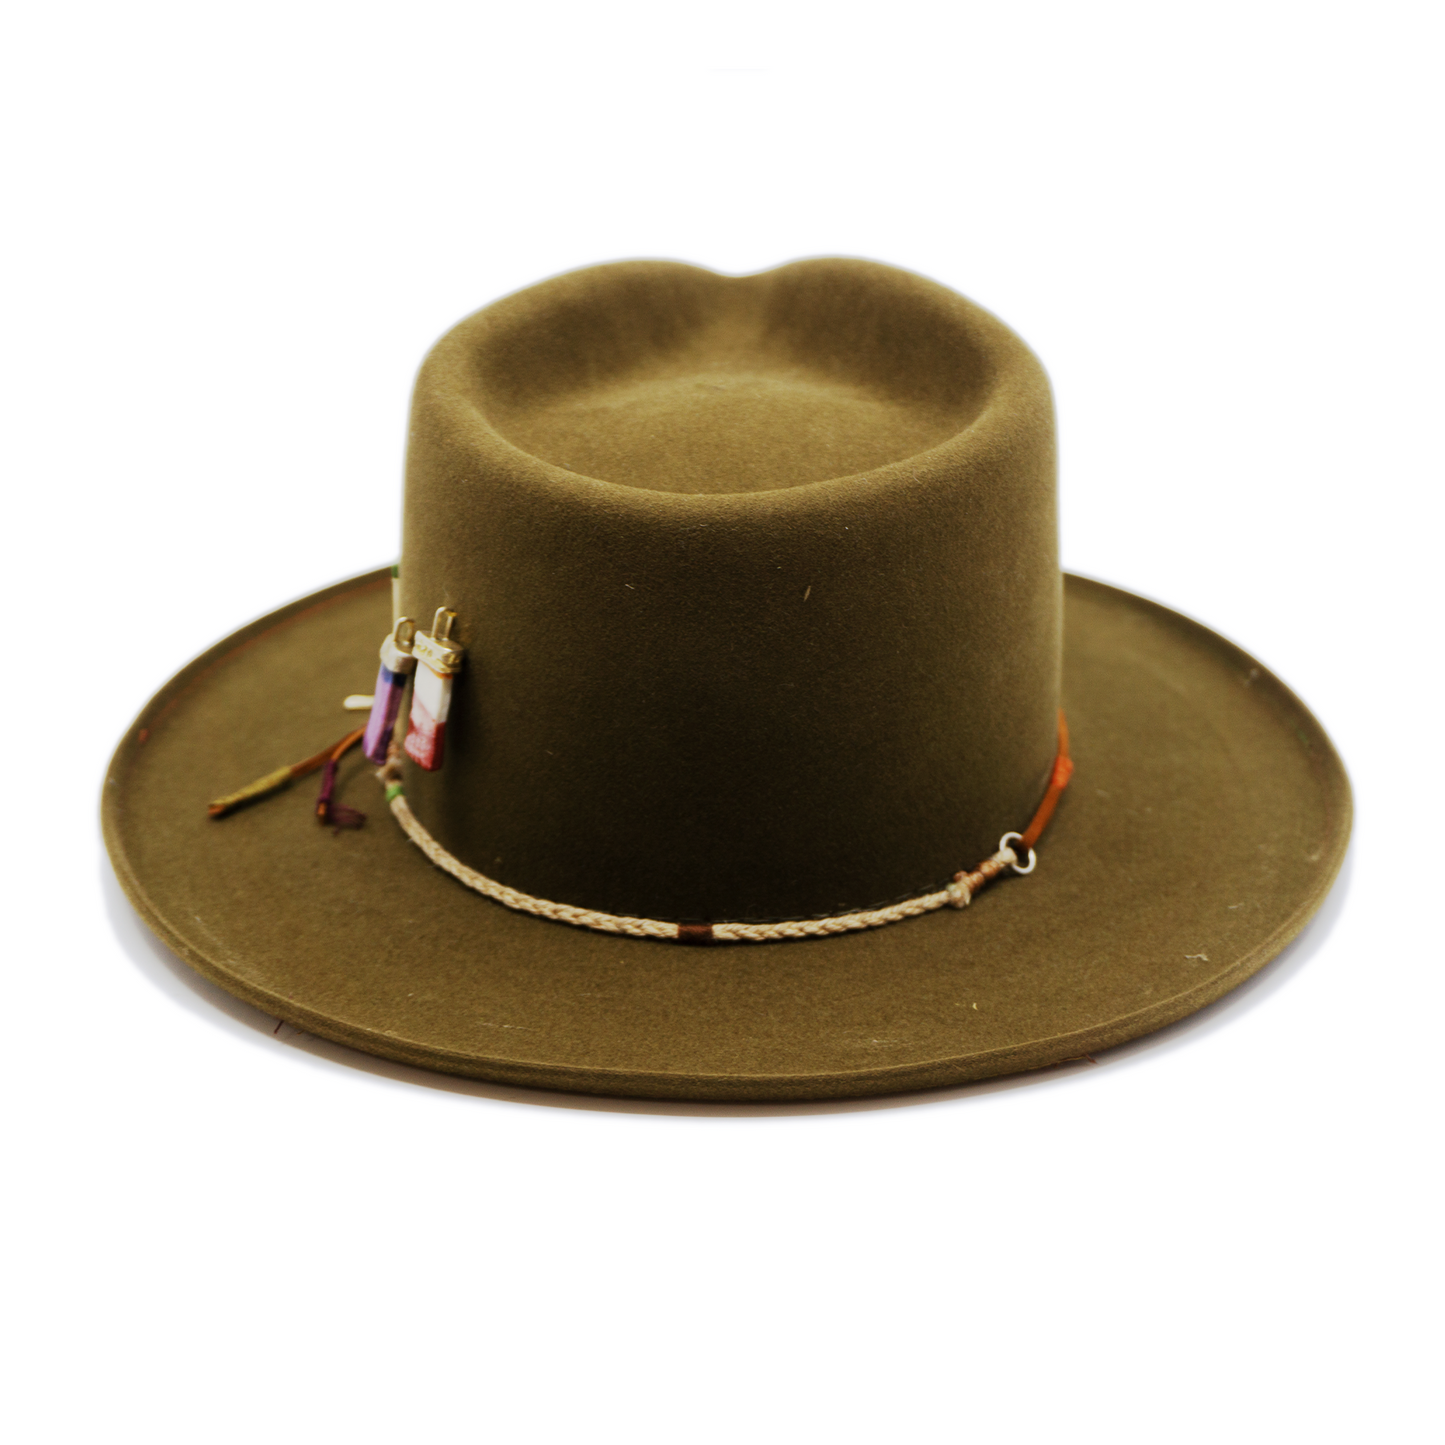 100% felt hat in New Green  Western  Weight   Braided twine and suede cord   with multicolor accents  threads   Italian ceramic pieces  on crown  Pencil curled  brim  Made in USA